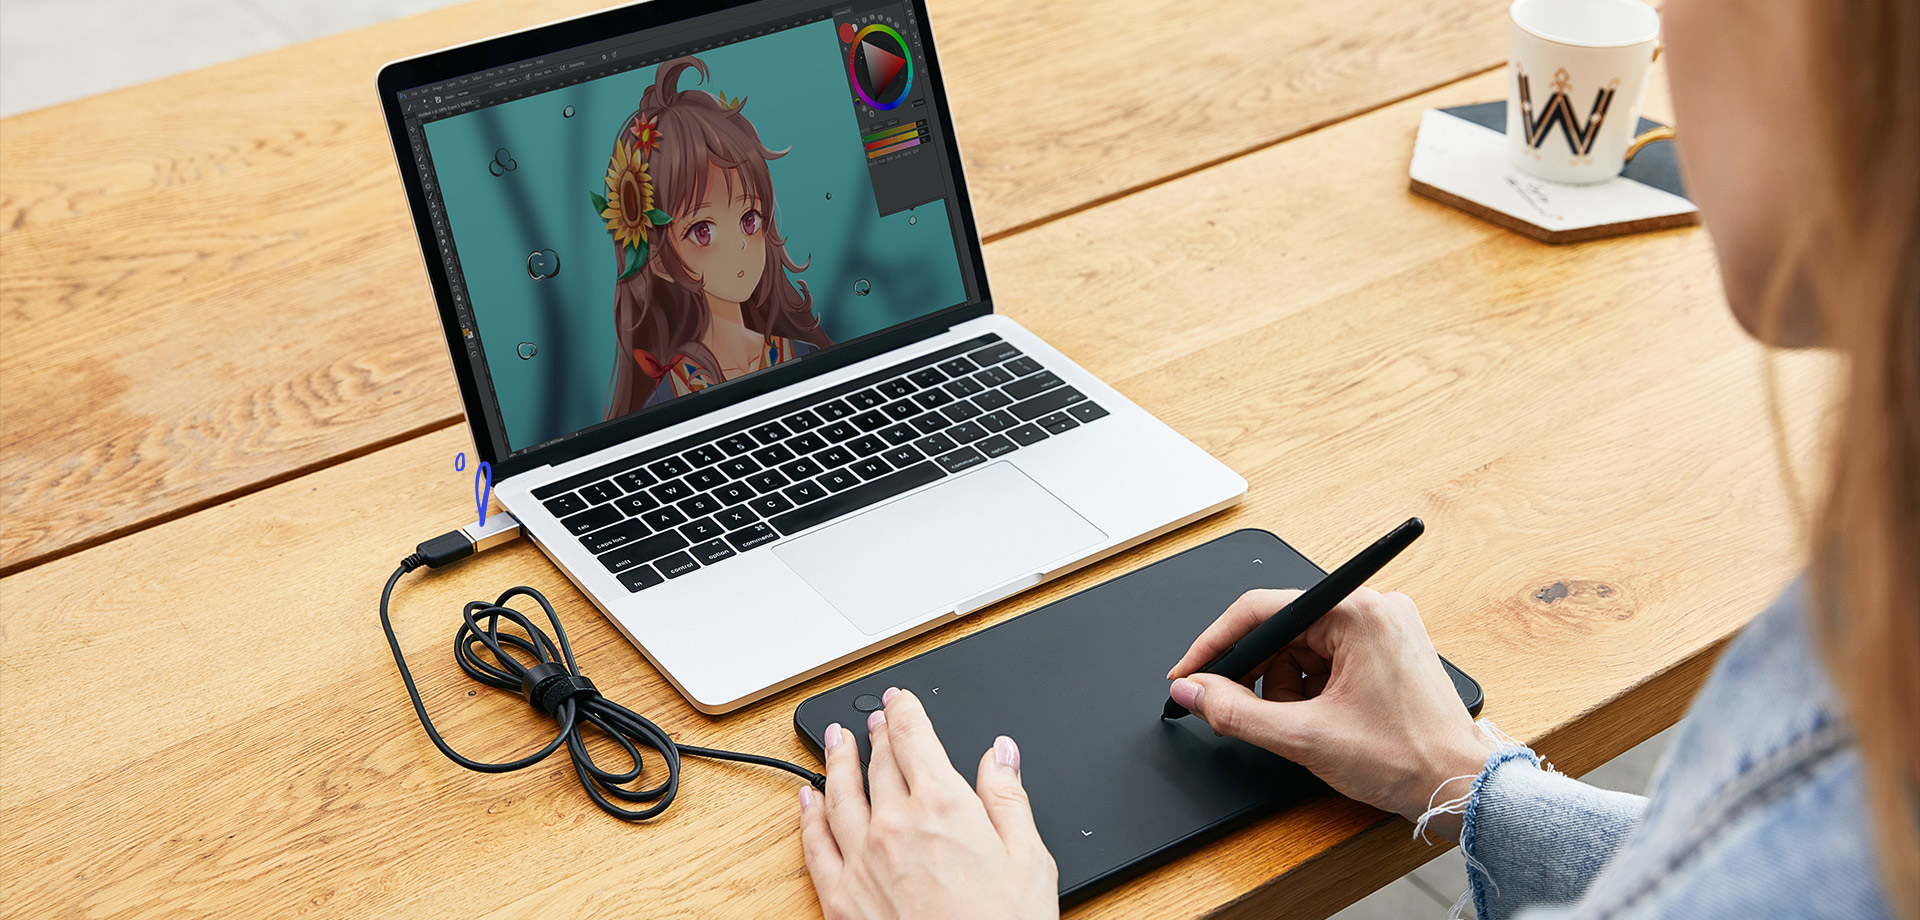 XP-Pen Deco mini7 graphics pad supports a USB-C to USB-C connection